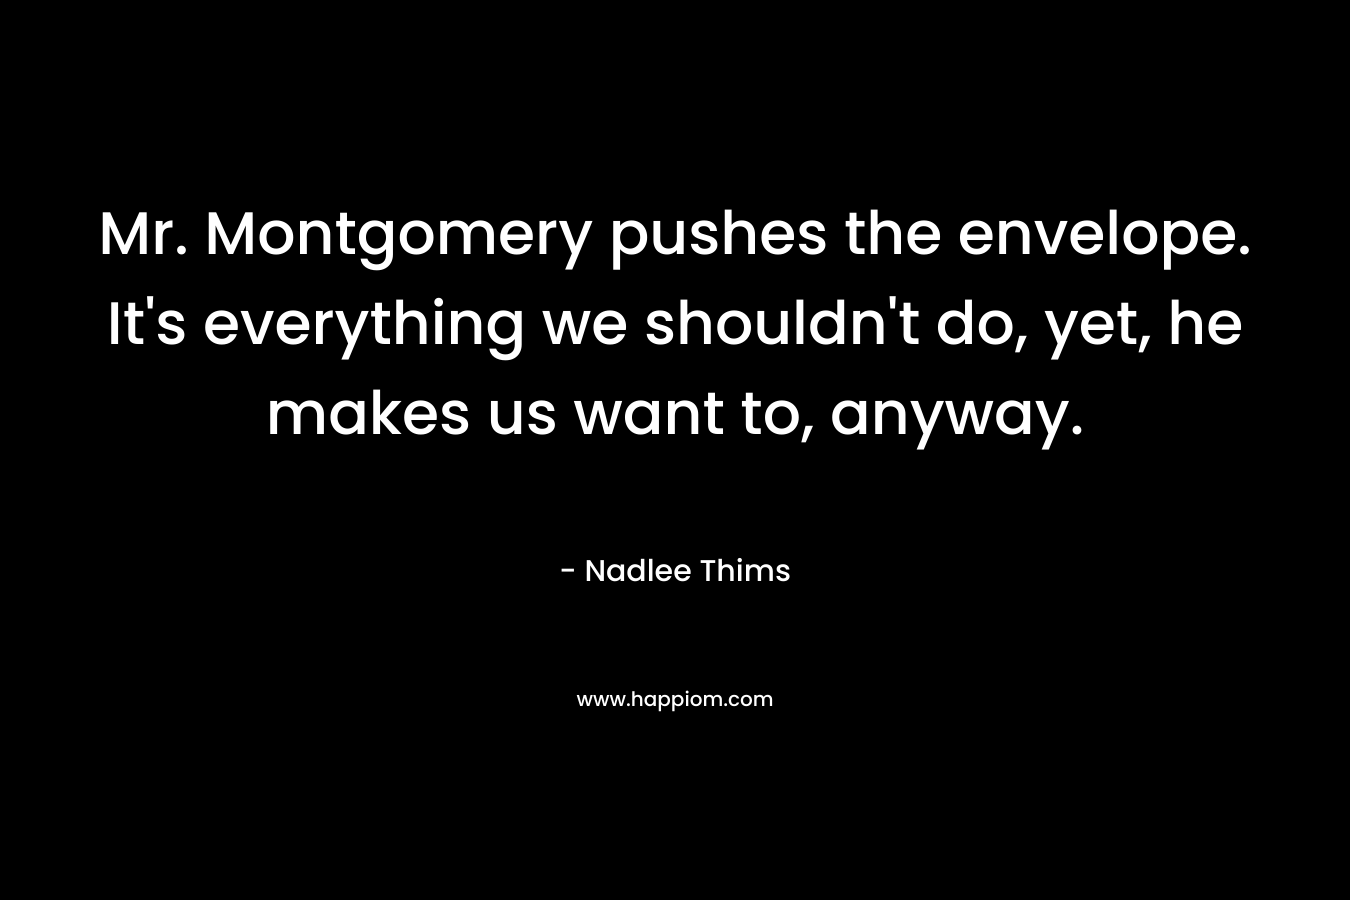 Mr. Montgomery pushes the envelope. It’s everything we shouldn’t do, yet, he makes us want to, anyway. – Nadlee Thims